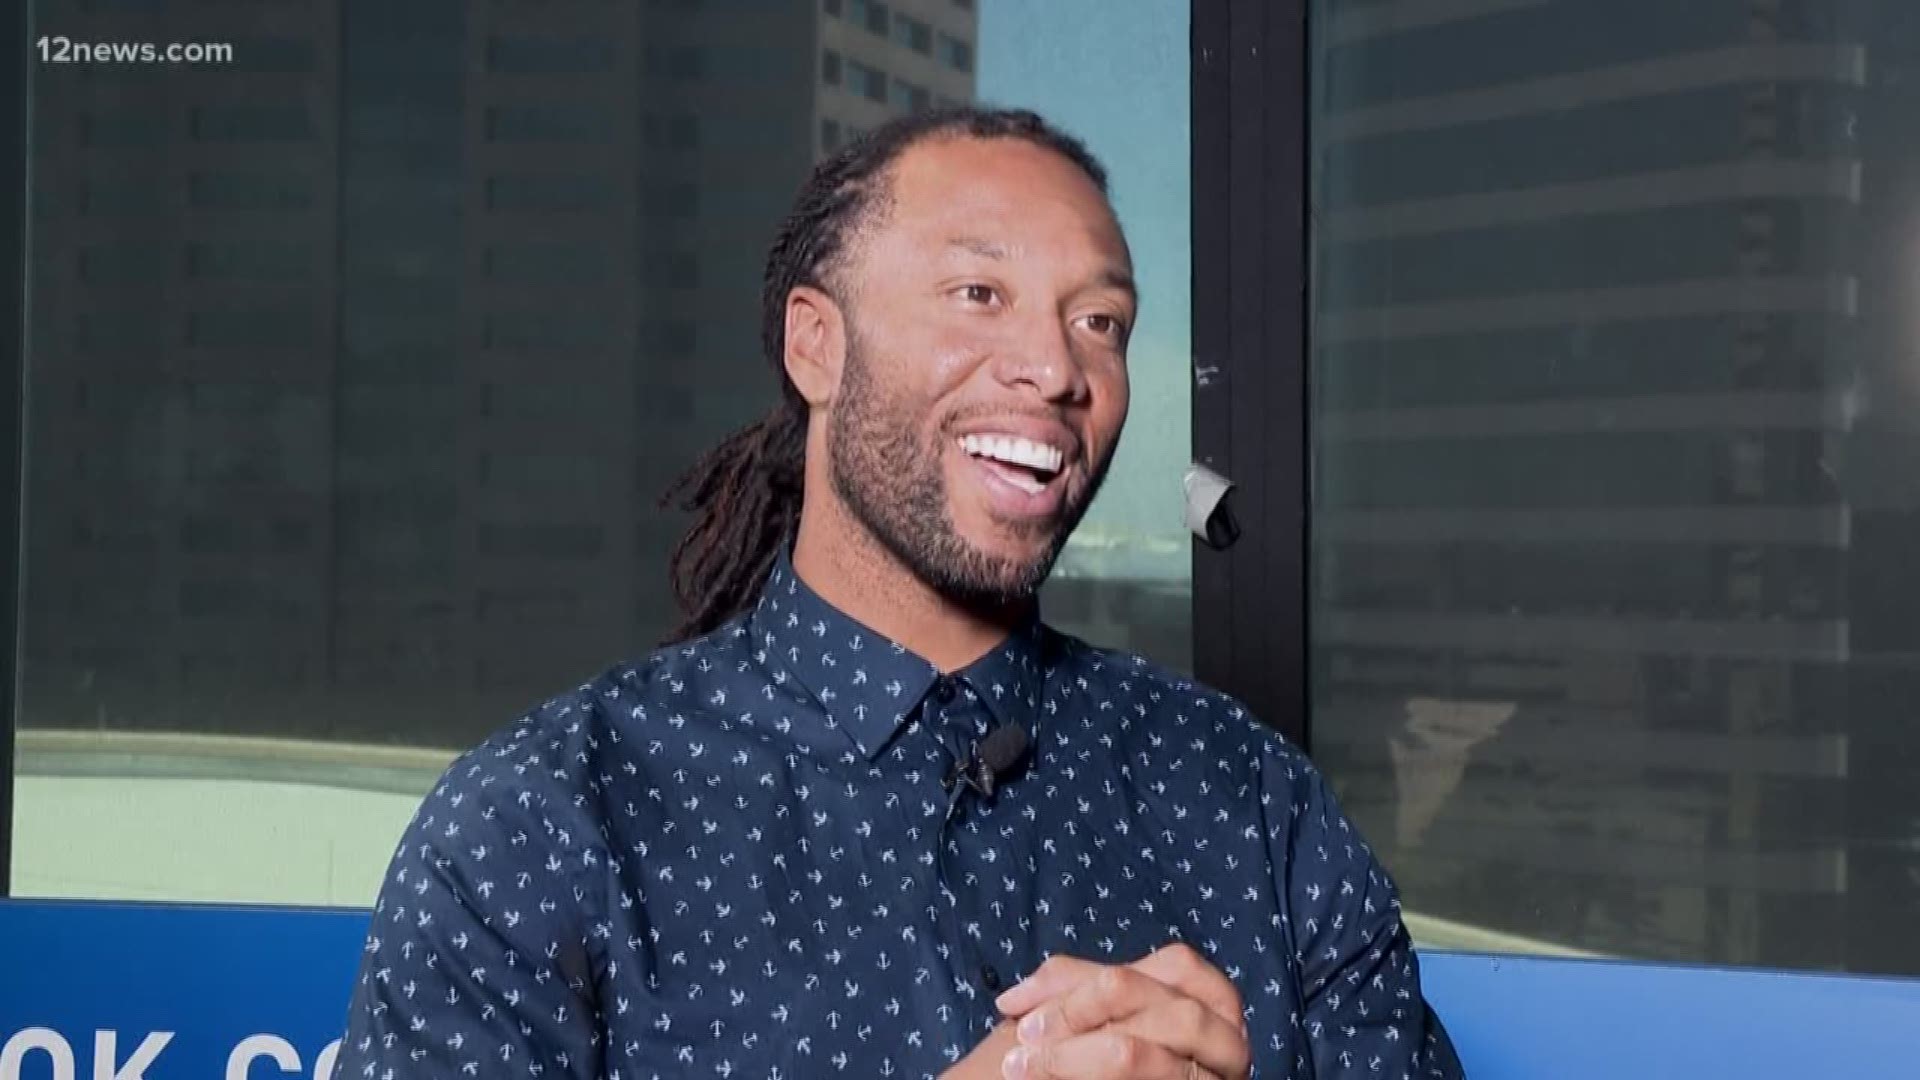 For the ninth year, Larry Fitzgerald will bring out some star power to the diamond at Salt River Fields for his celebrity softball game.